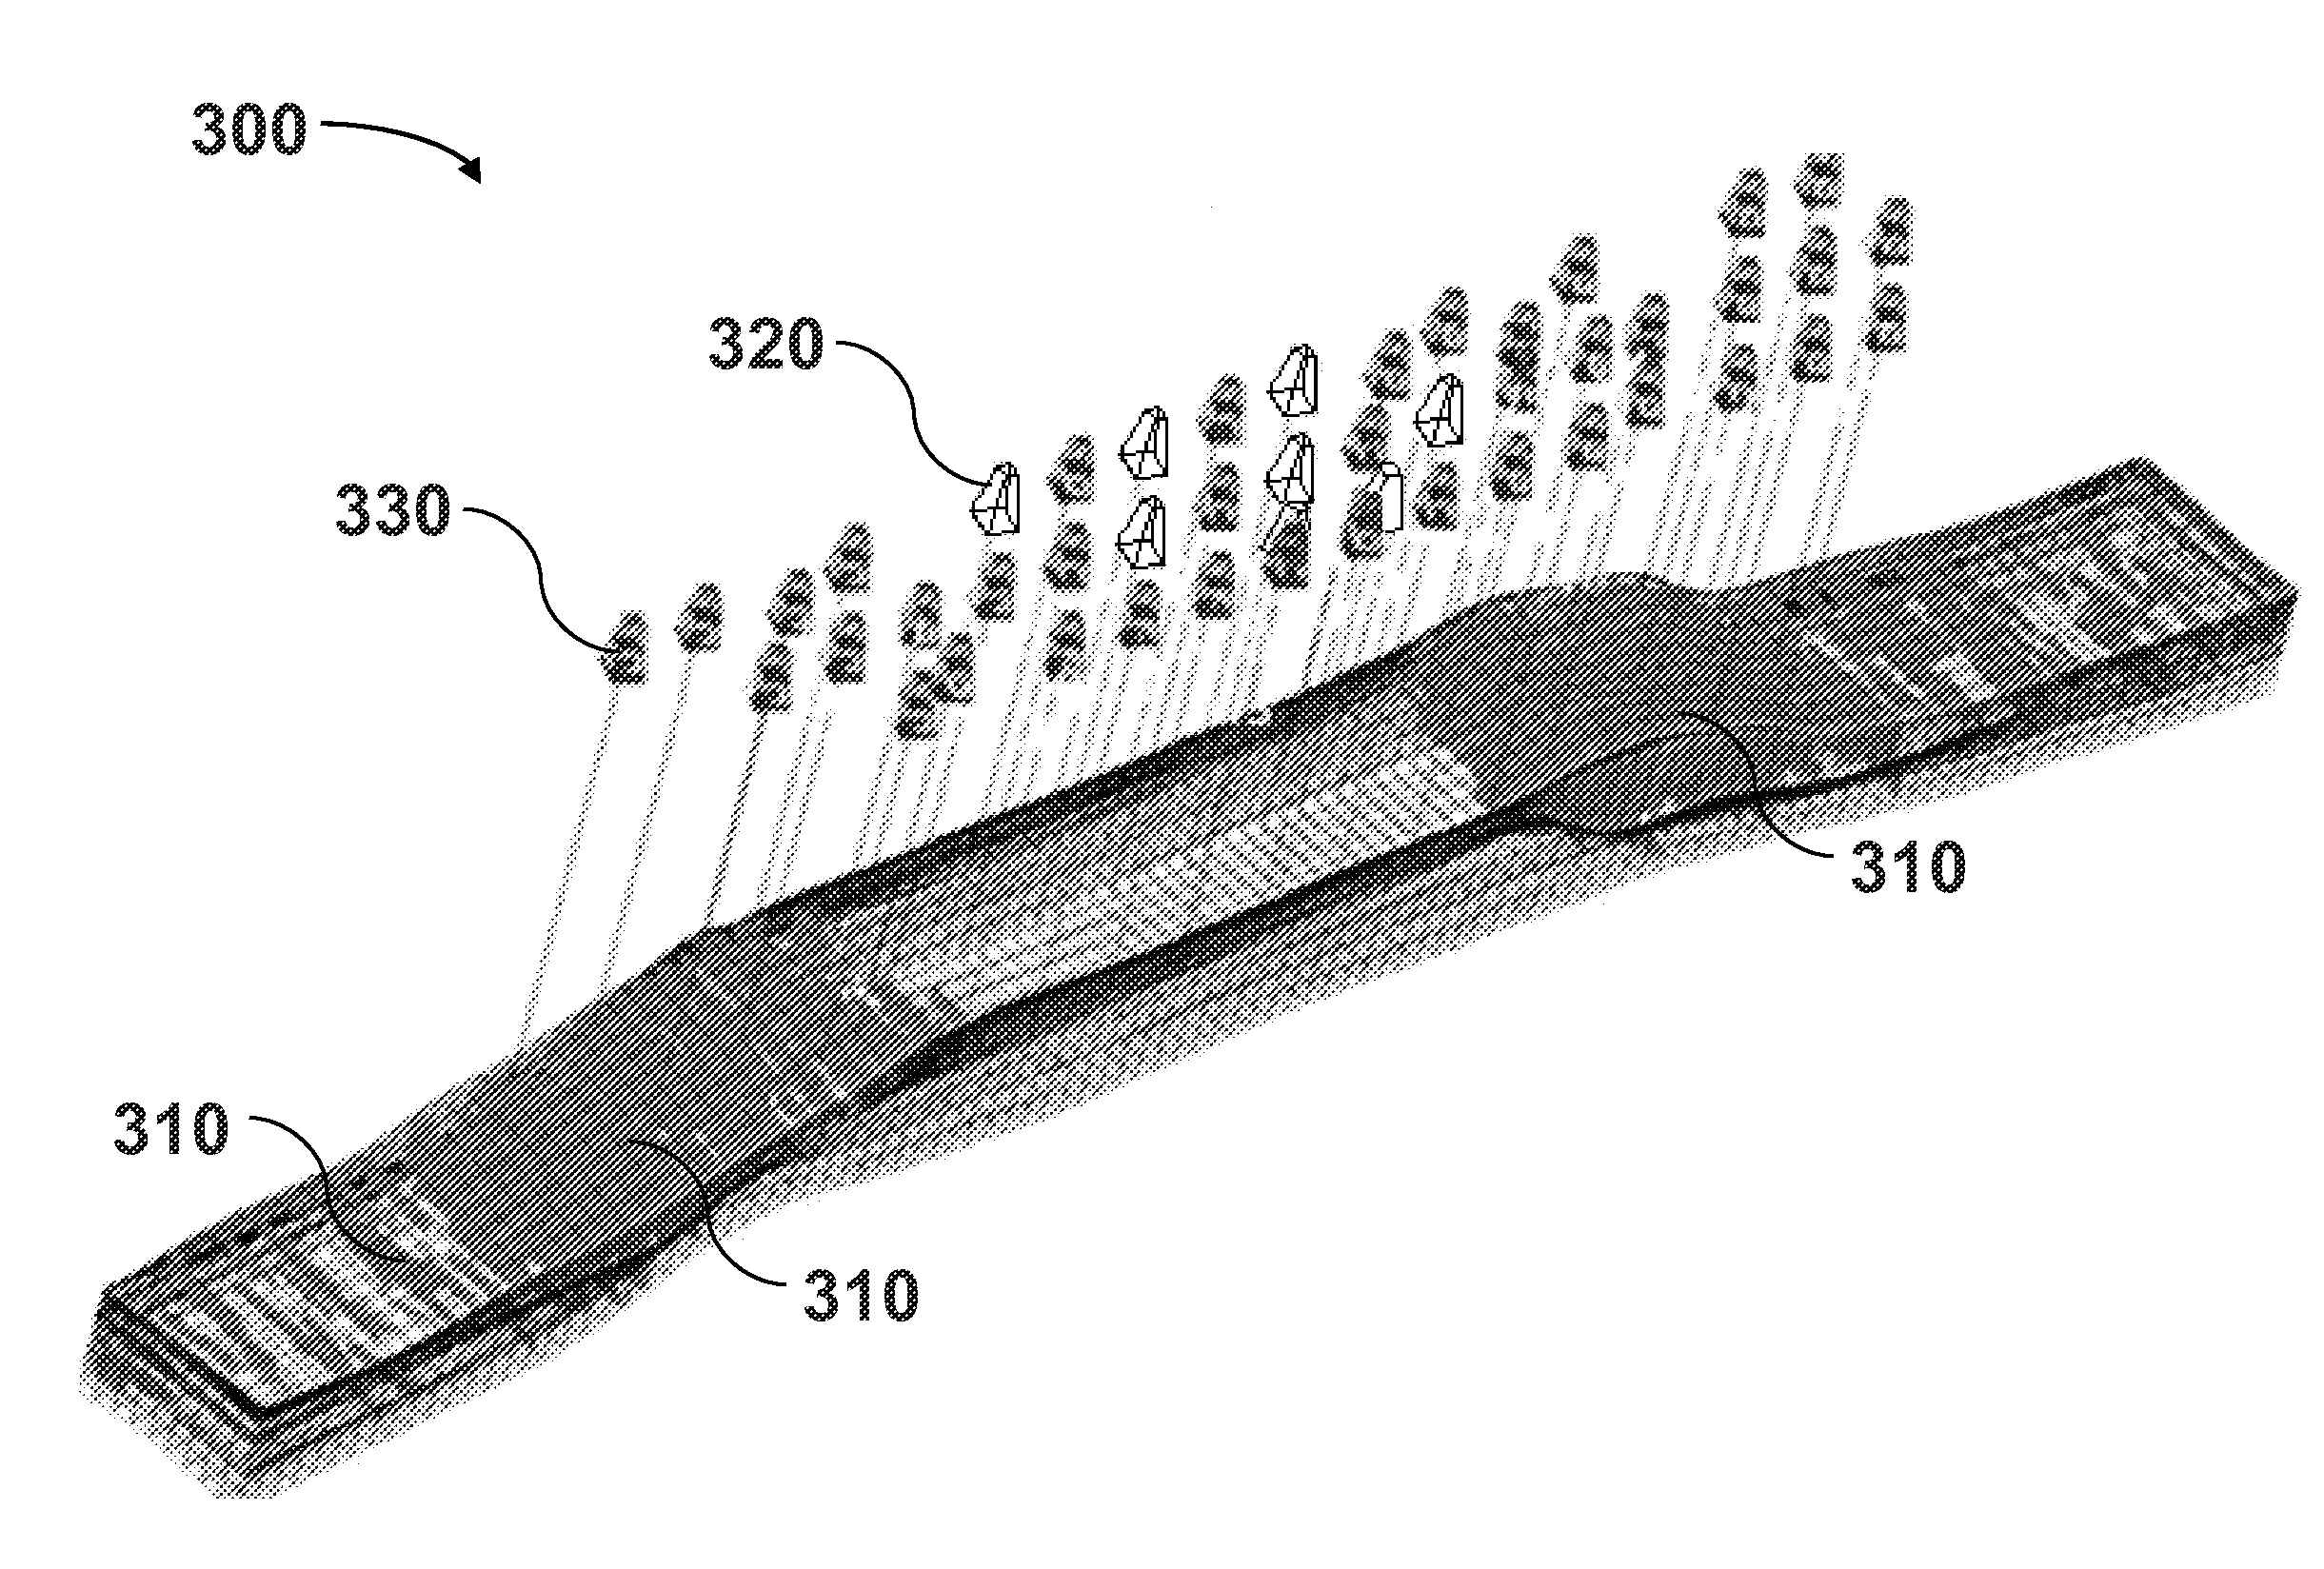 System and method of grid generation for discrete fracture modeling